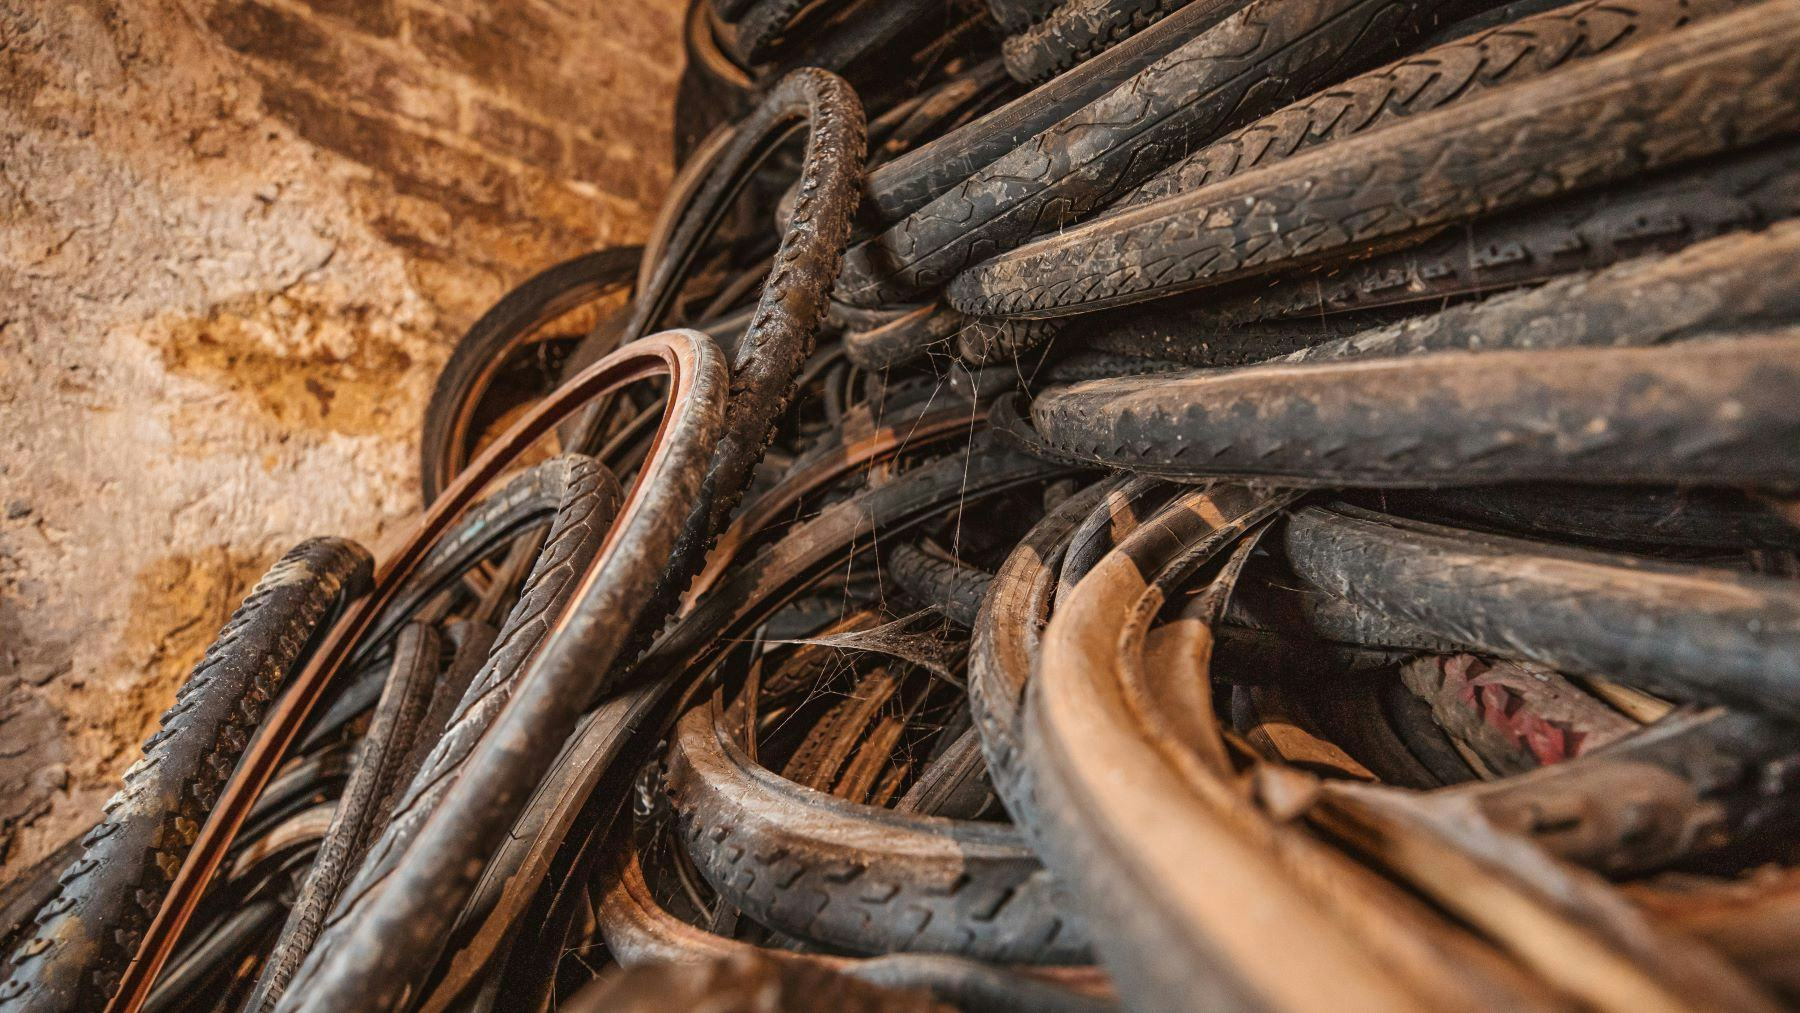 20,000 tyres have finally been collected for recycling after a long wait. – Photo Schwalbe